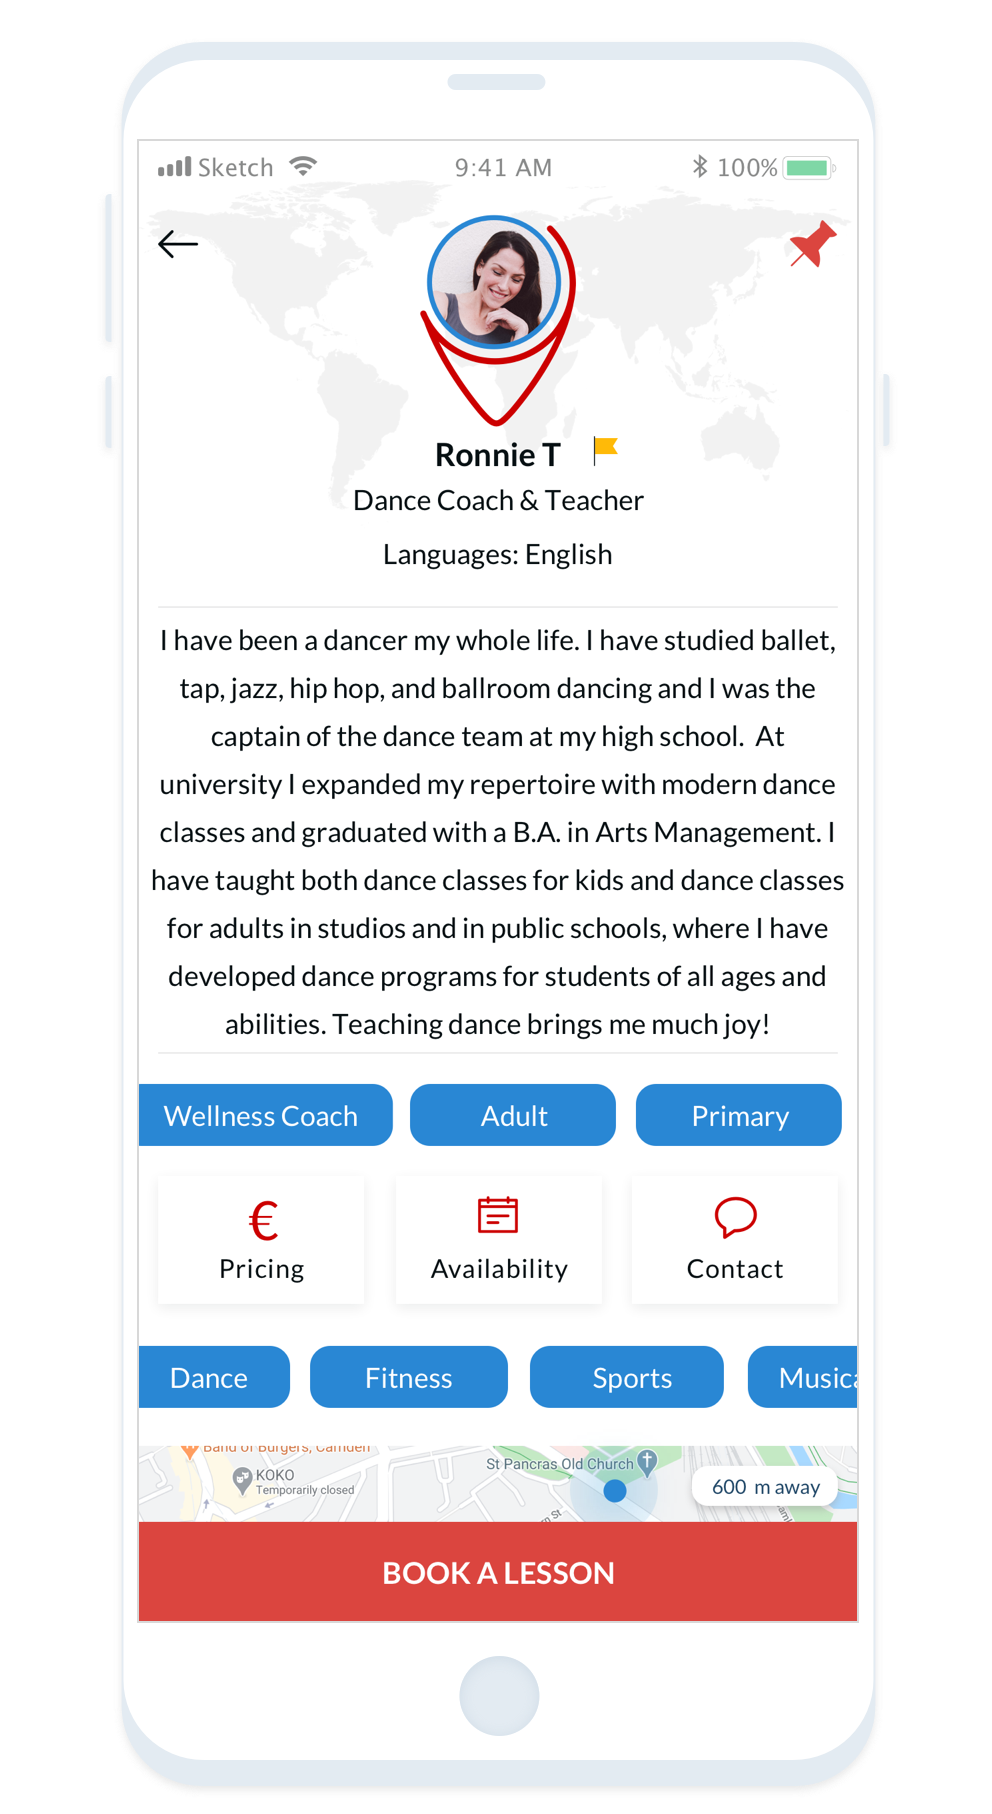 Find music teacher jobs on Tutor Around app! Many tutoring opportunities available. Students are posting personal tutor jobs.